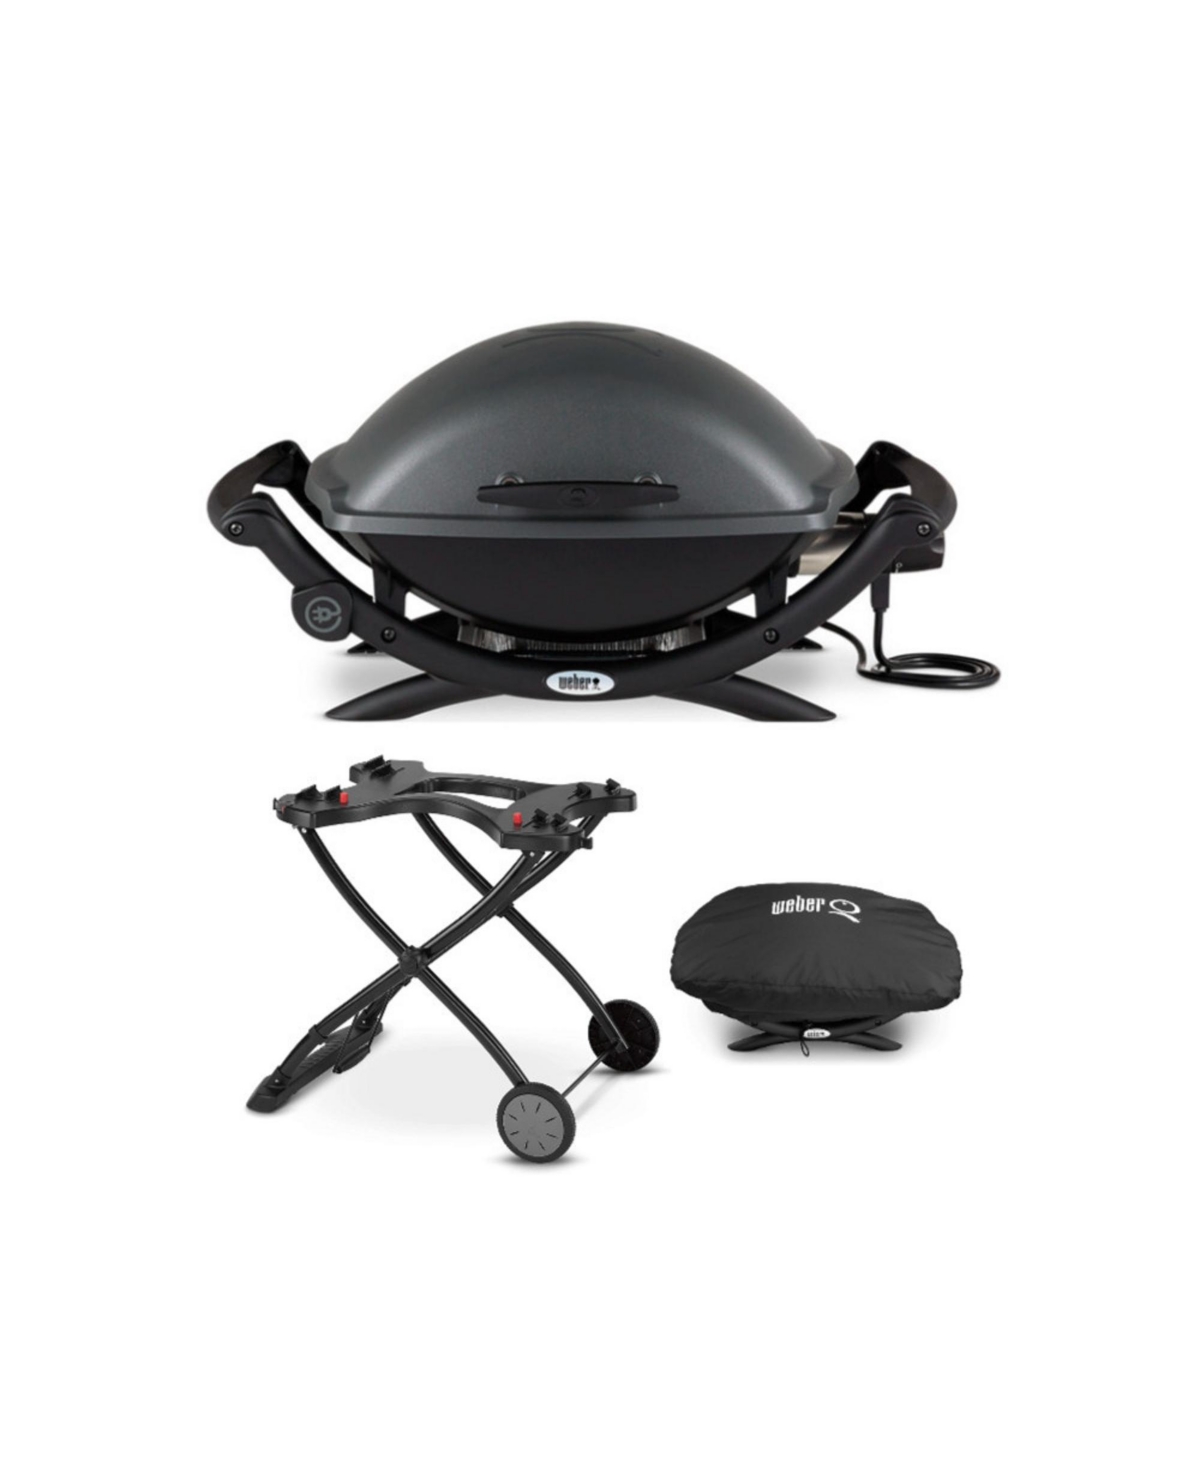 Q 2400 Electric Grill (Black) with Grill Cover and Cart Bundle - Black